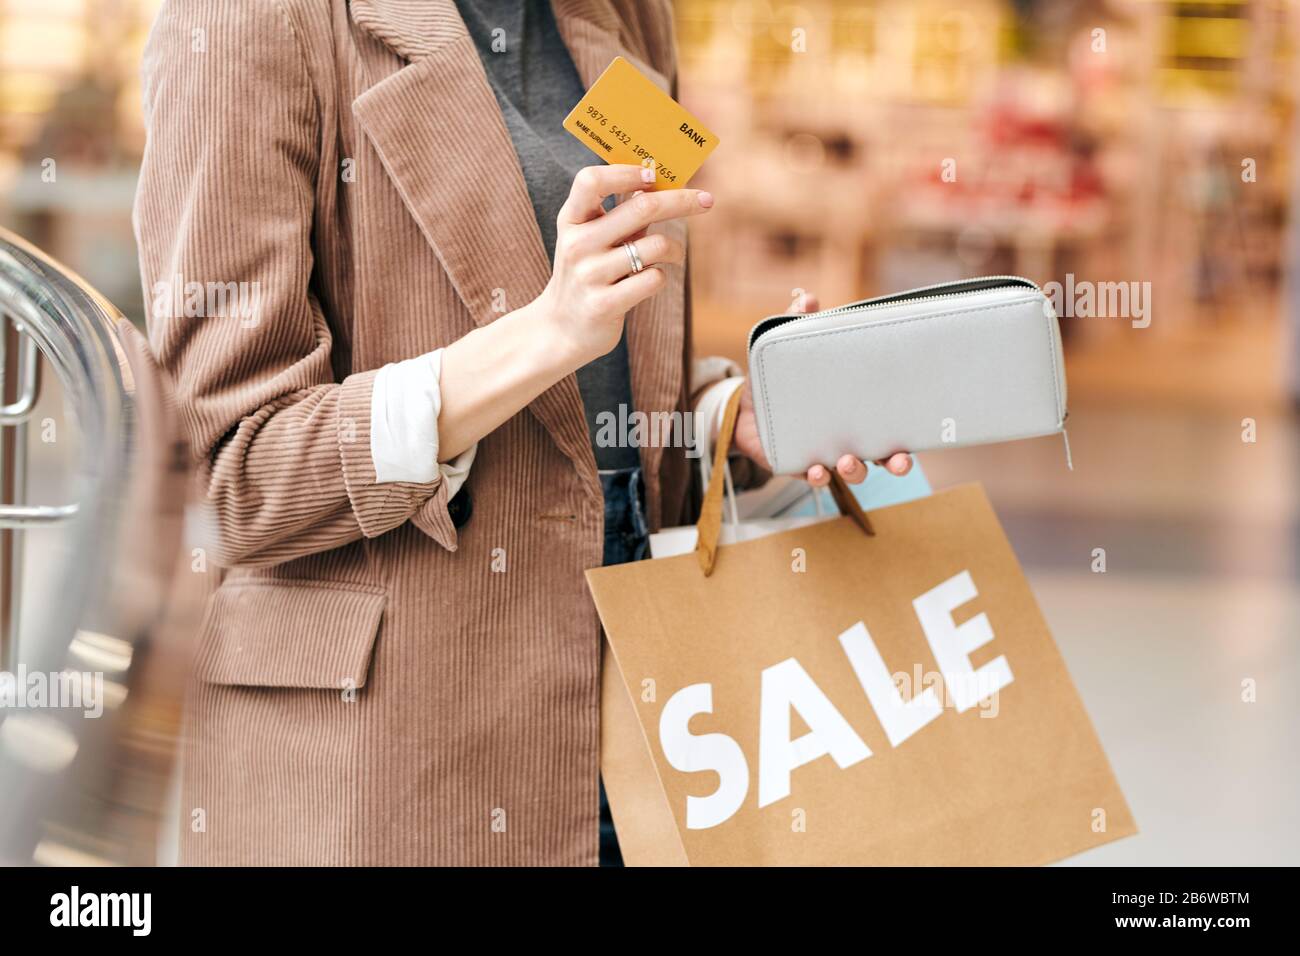 Close-up of unrecognizable woman in velvet jacket holding credit card and purse while preparing to spend money for shopping Stock Photo